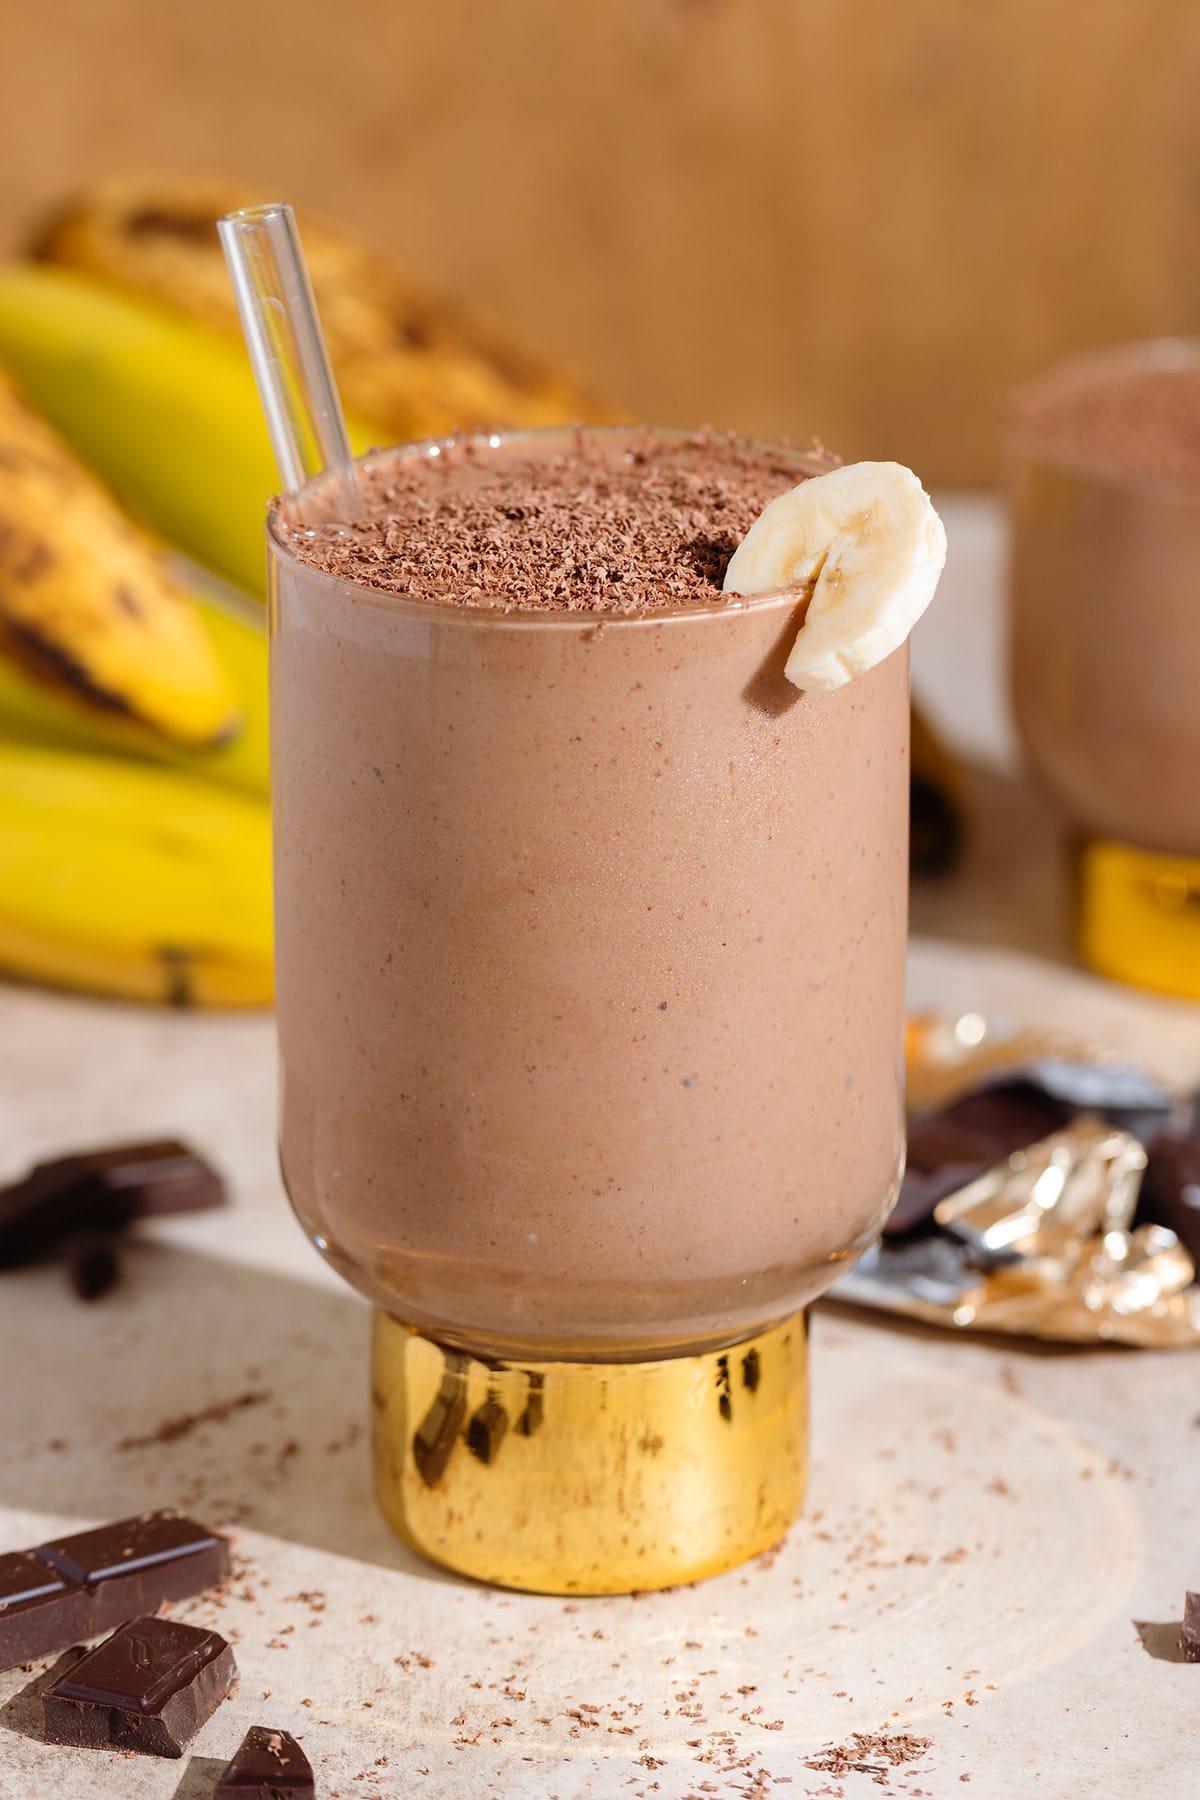 Chocolate smoothie in a tall glass with a shiny gold thick stem garnished with a slice of banana and shaved chocolate.